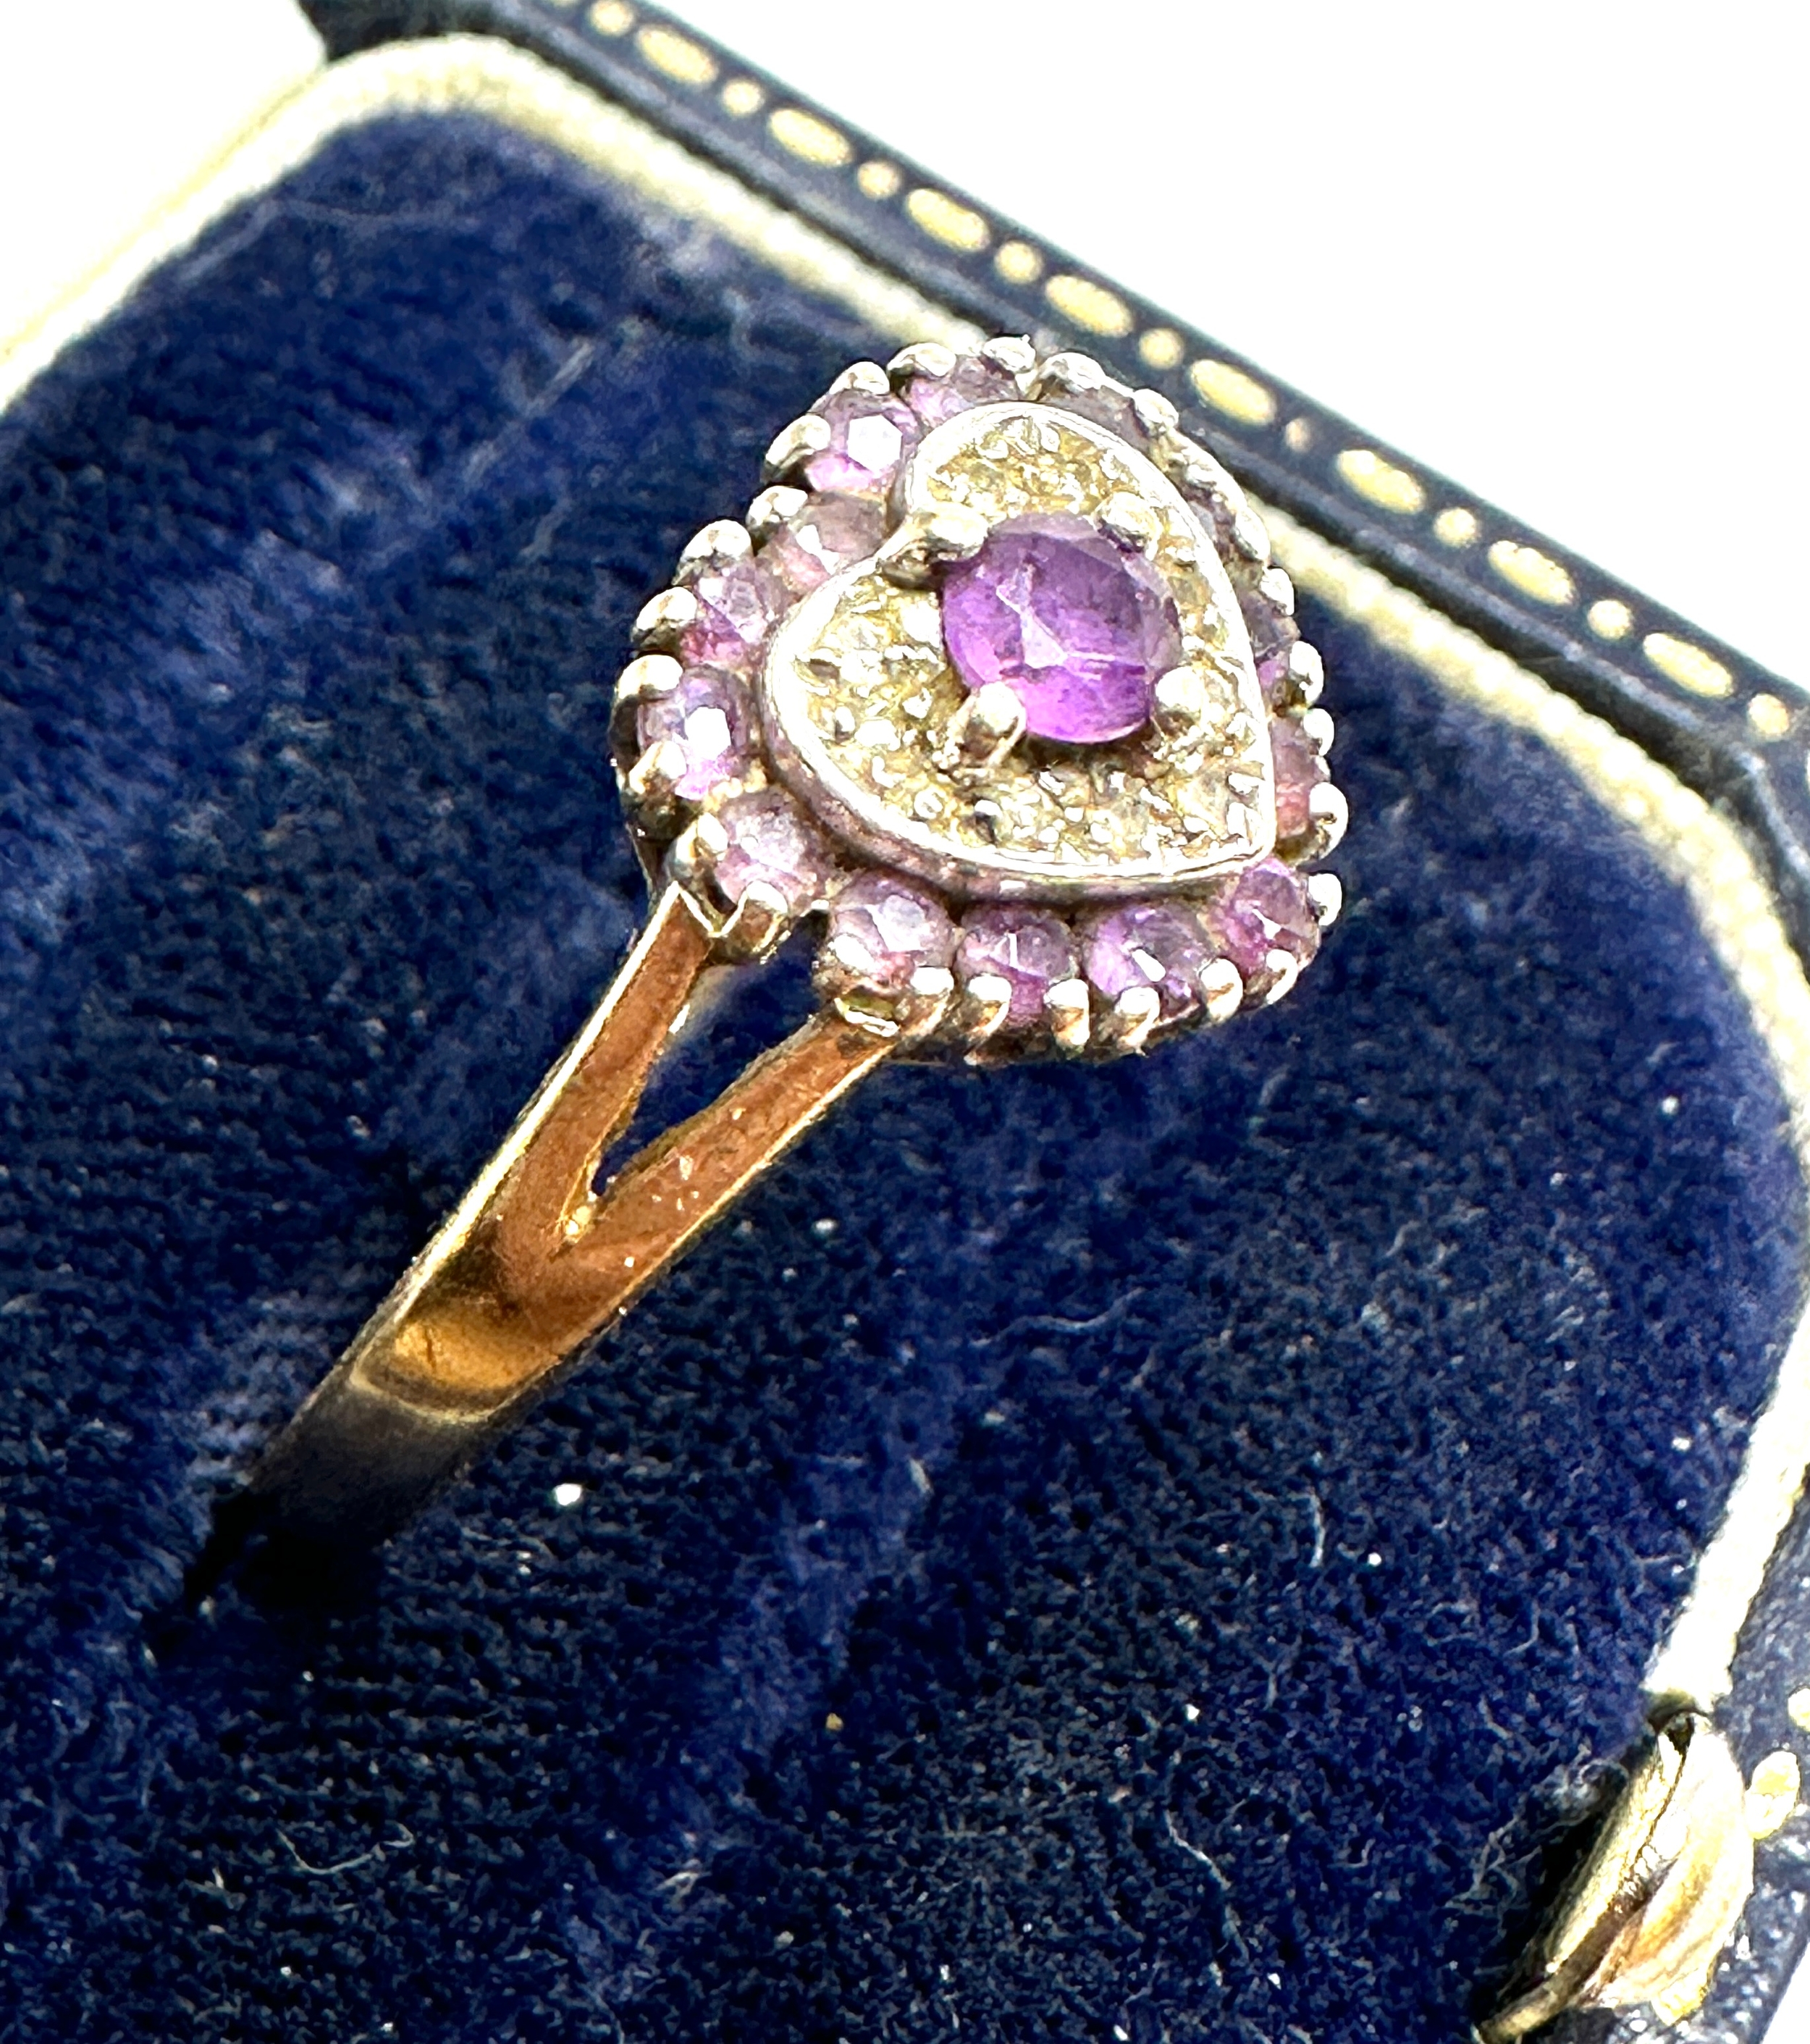 9ct gold diamond & amethyst heart ring weight 3g - Image 2 of 4